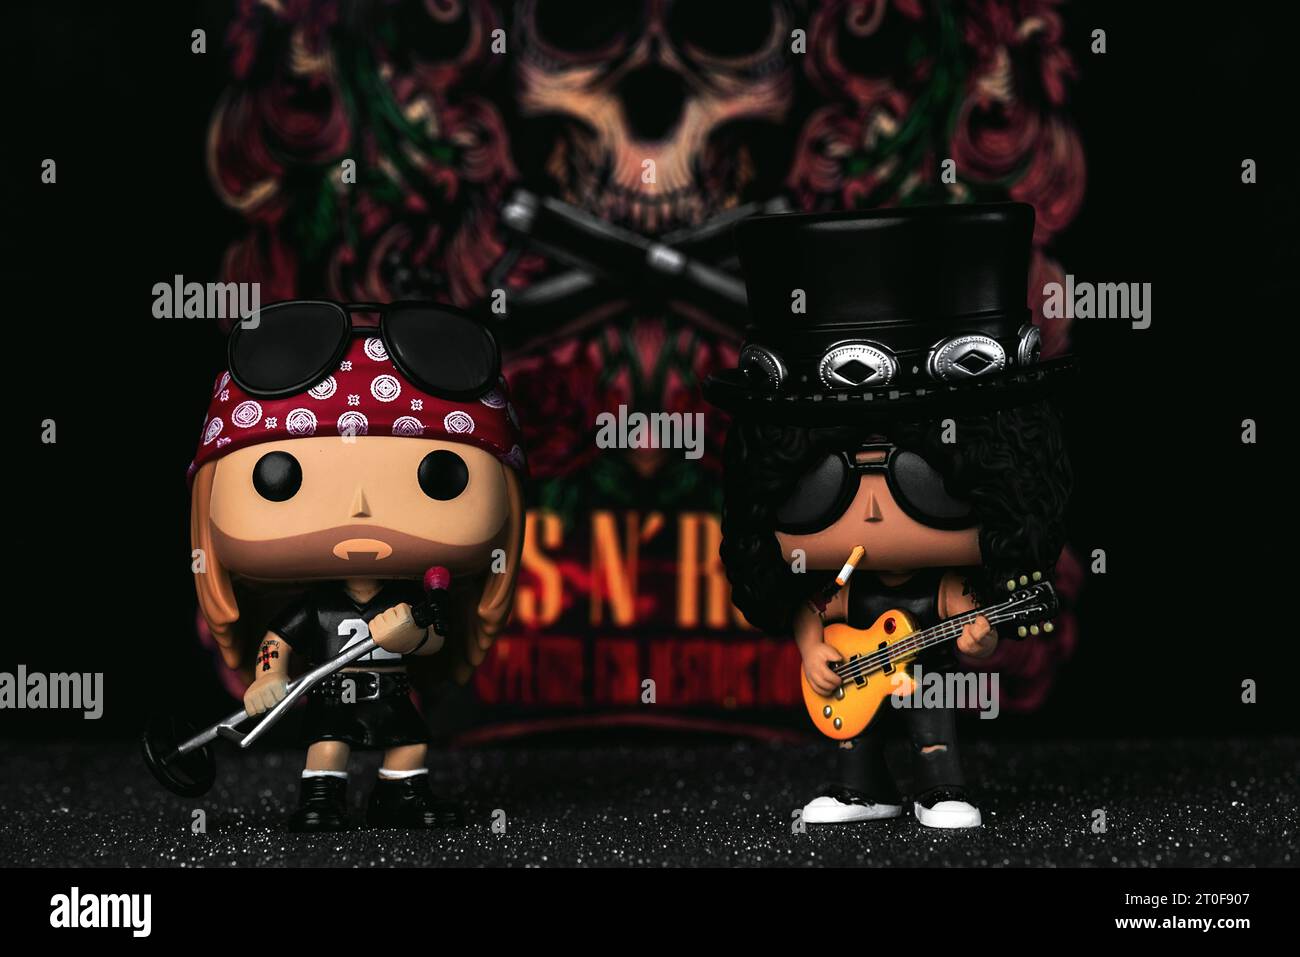 Funko POP vinyl figures of Axl Rose and Slash of the american hard rock group Guns N' Roses in front of Guns N' Roses poster. Illustrative editorial o Stock Photo